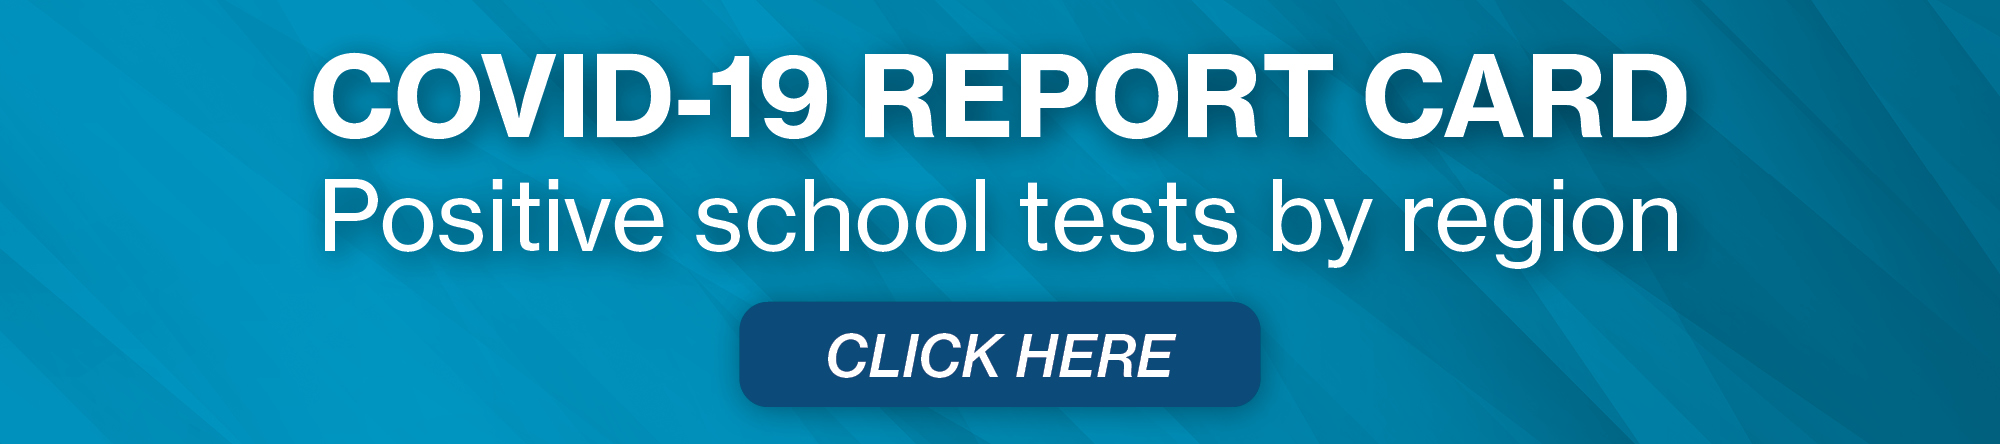 COVID-19 Report Card-Positive School Tests by Region